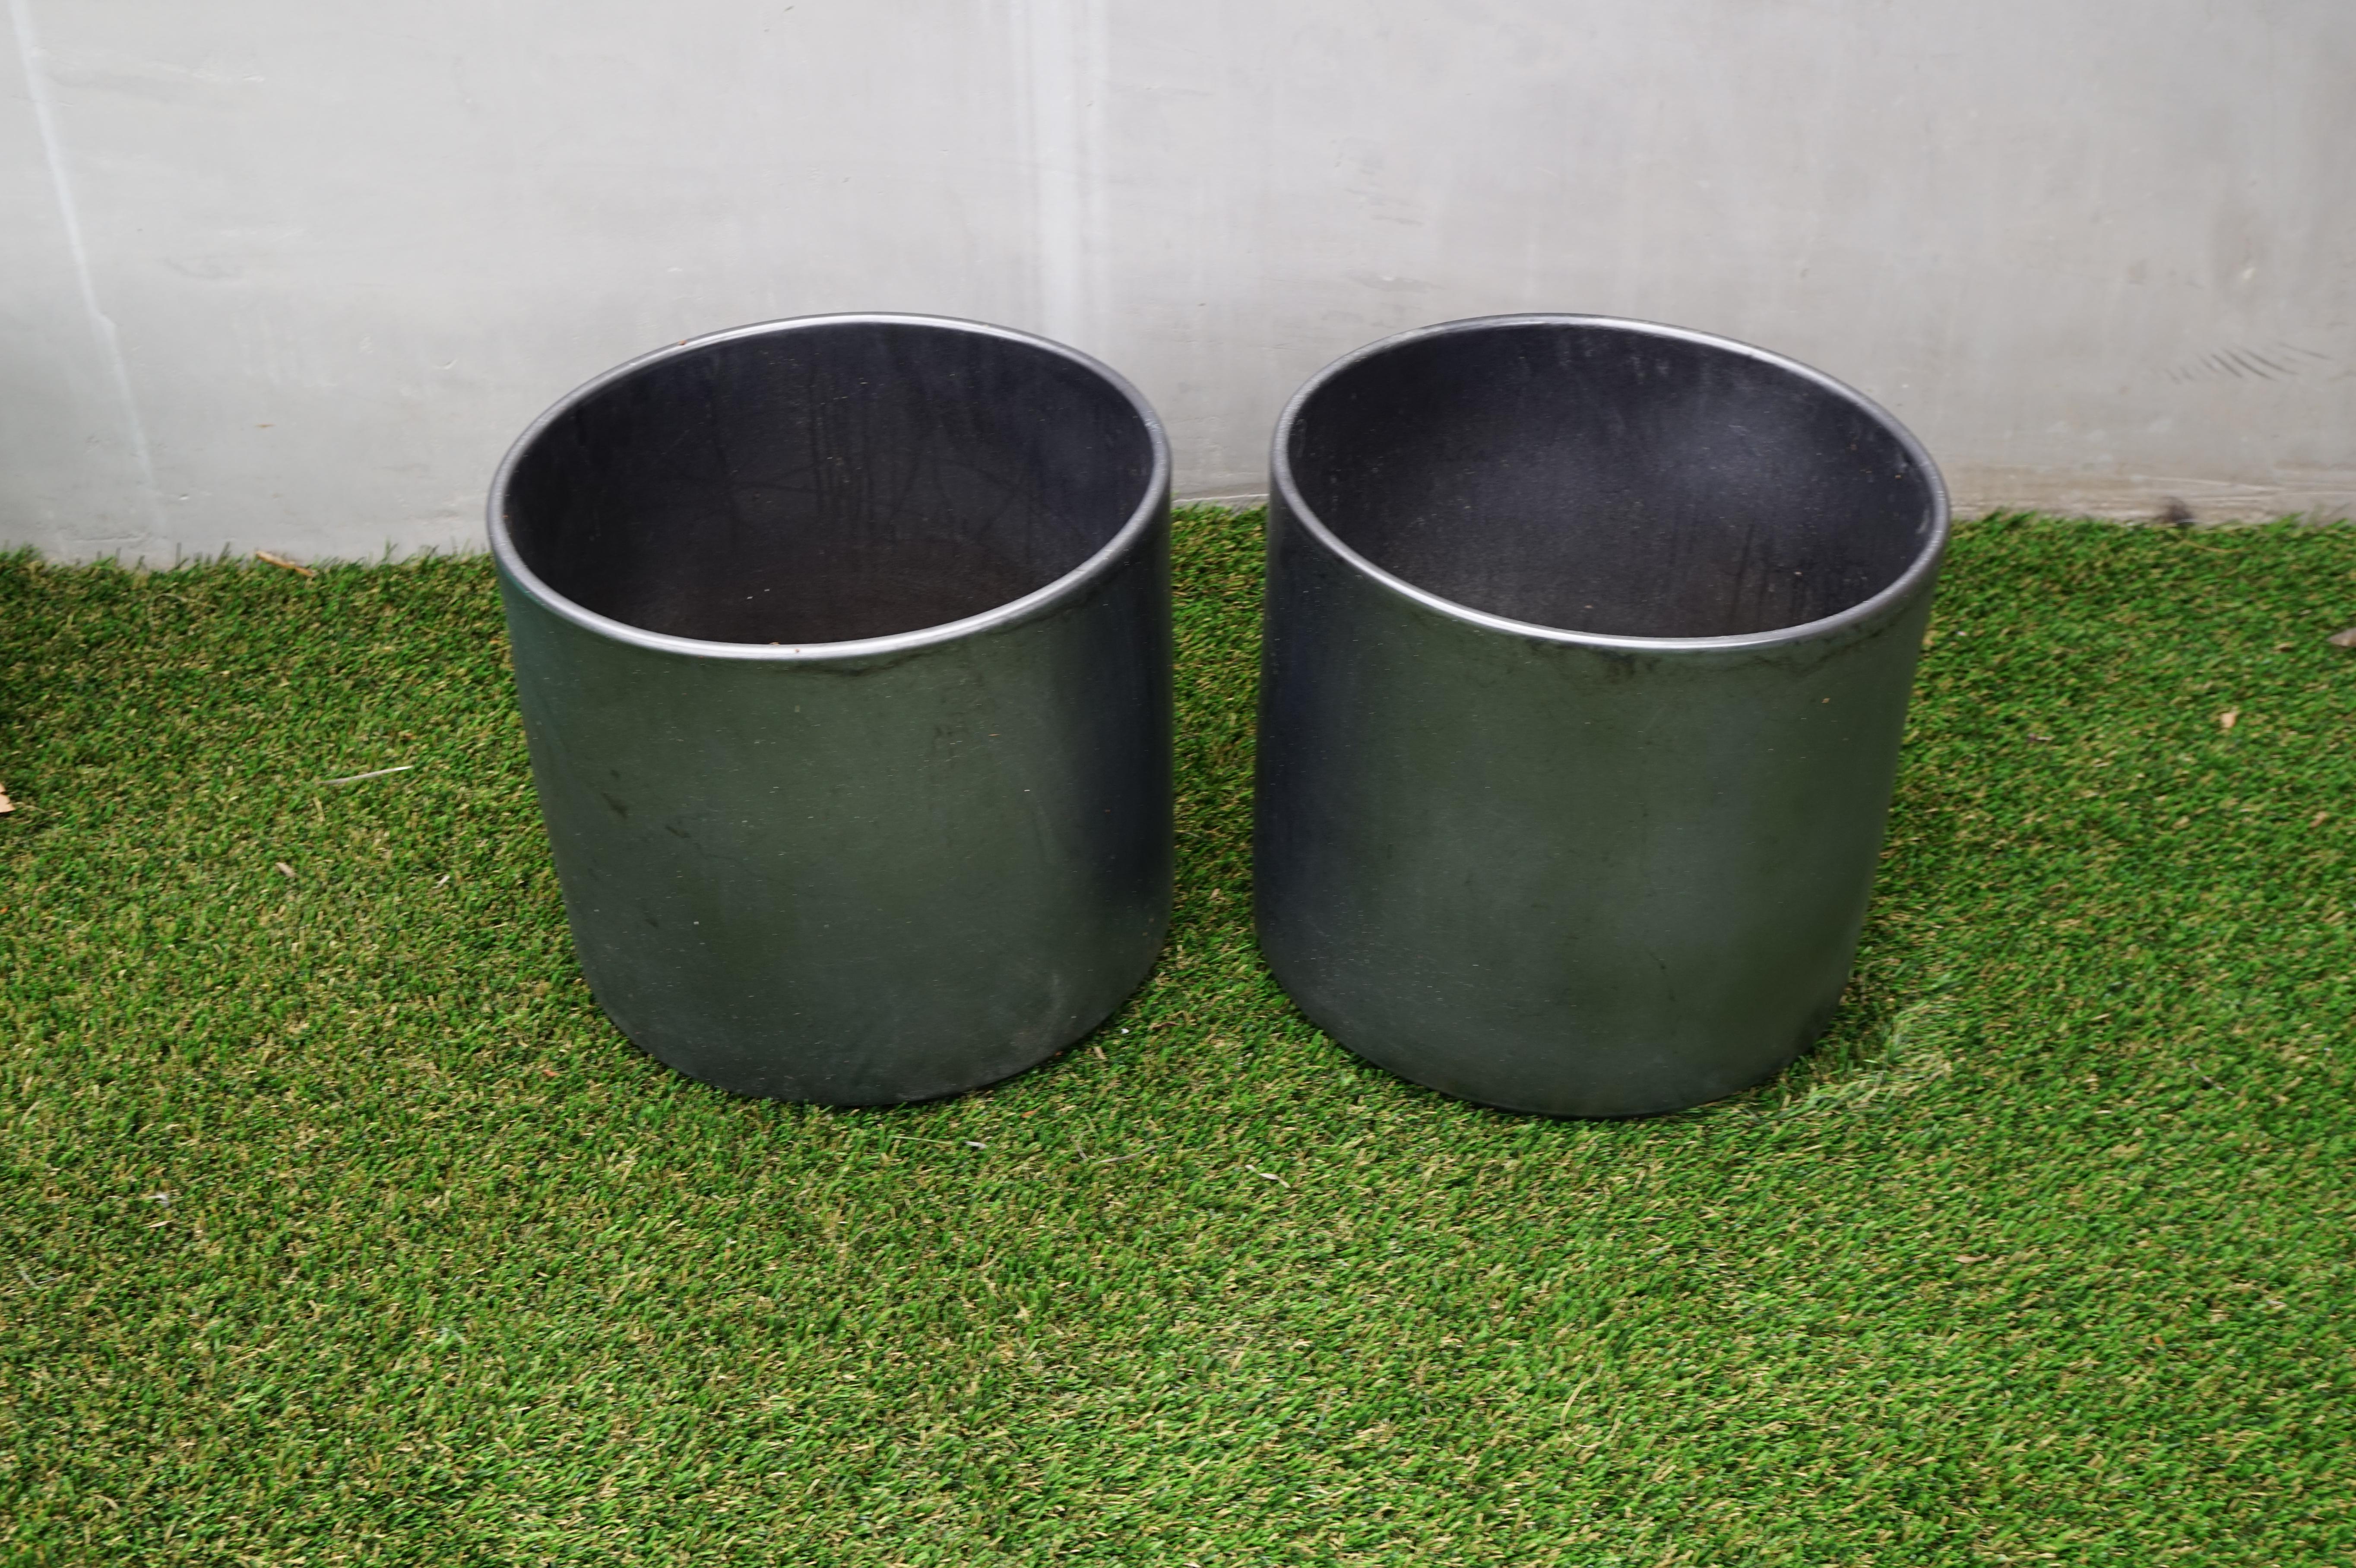 Mid-Century Modern Midcentury Architectural Pottery Gunmetal Ceramic Planters by Gainey 'Set of 2' For Sale